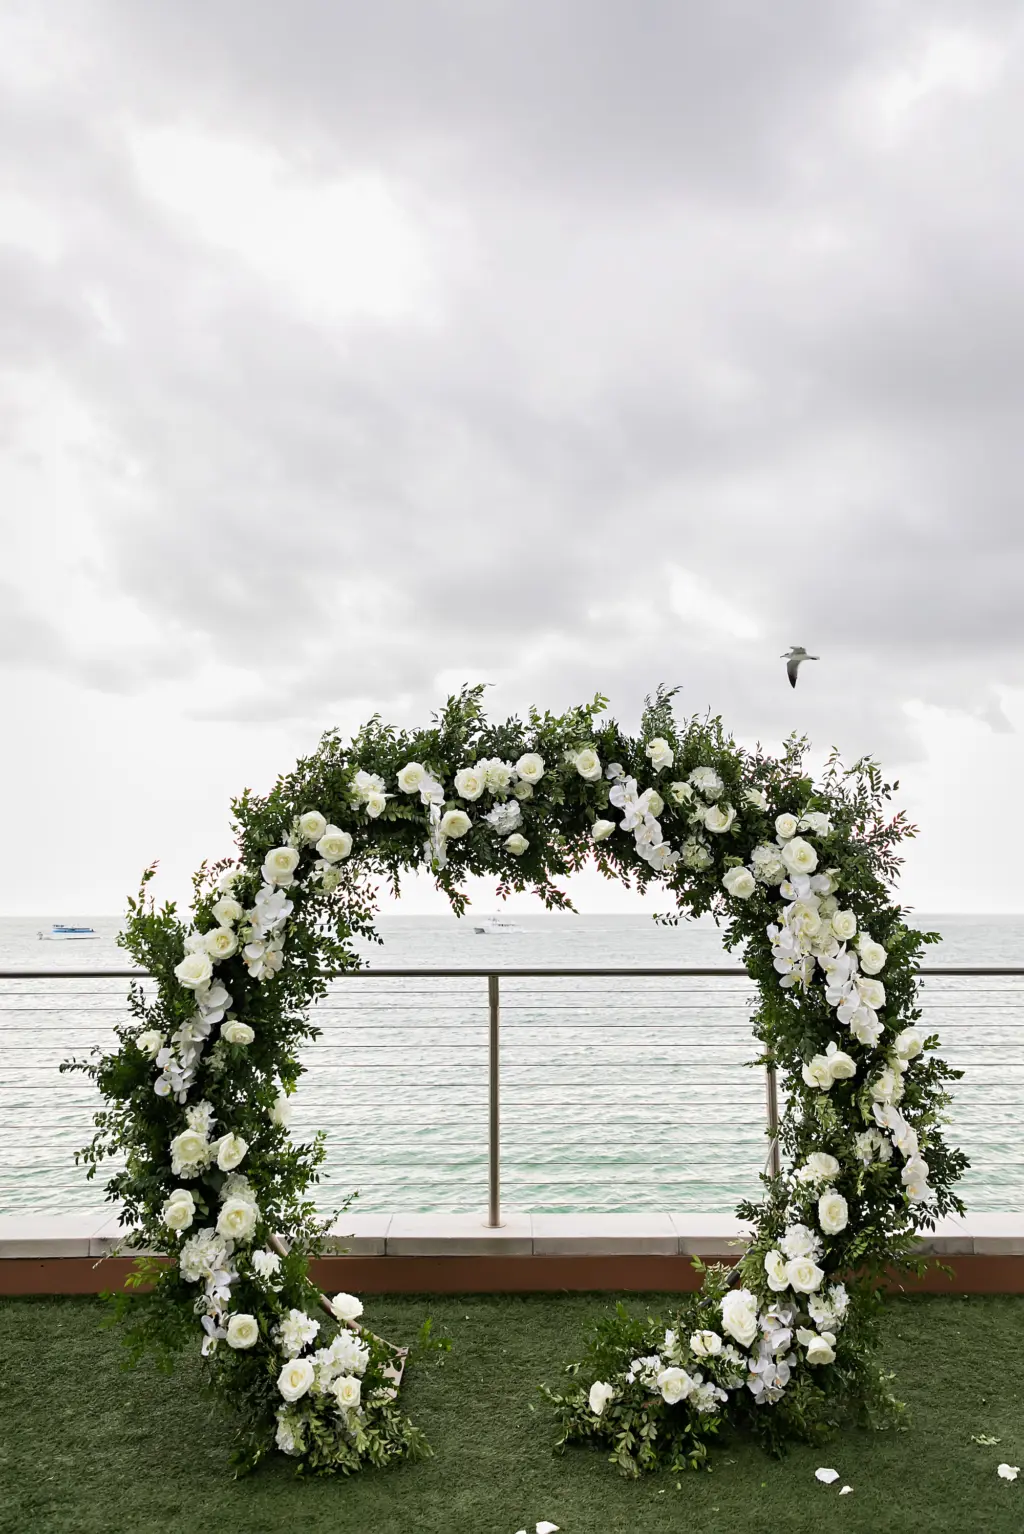 Round Wedding Ceremony Altar Arch Decor Ideas with Greenery, White Roses, and Hydrangeas